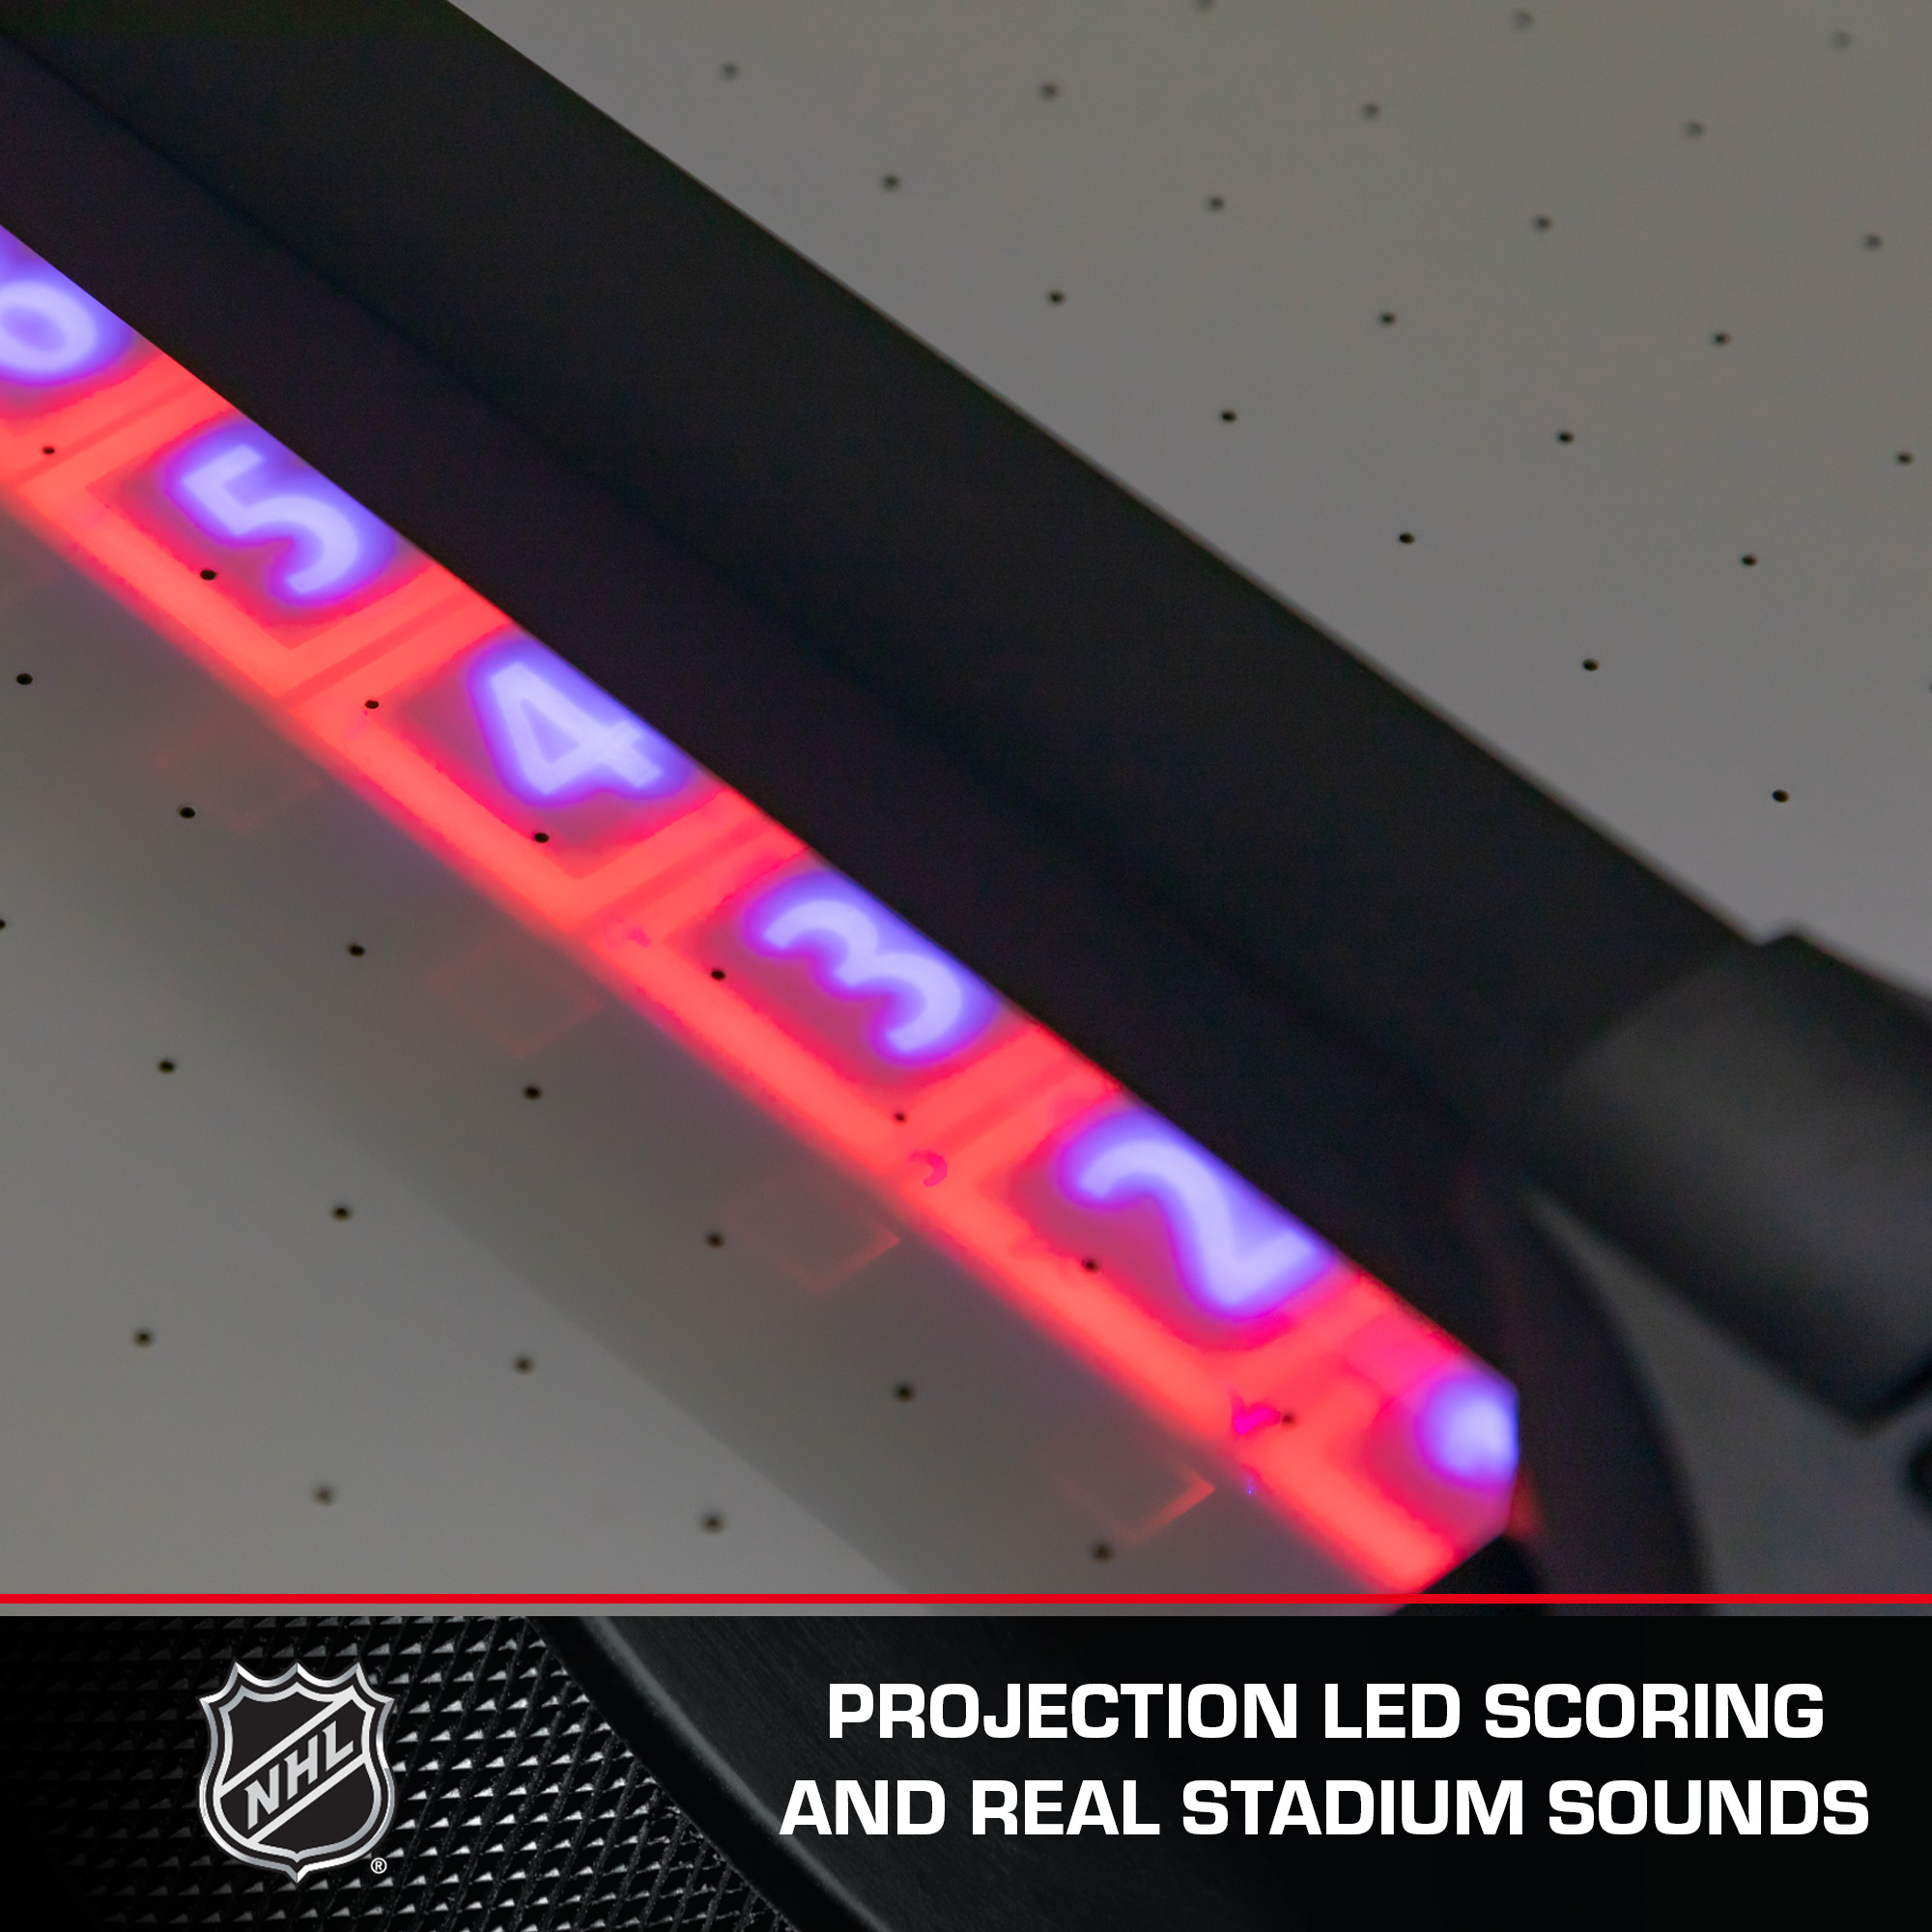 NHL Power Play Pro 84" Indoor Air Hockey Table with Overhead Projection LED Scoring and Light-Up Power Corners - image 4 of 8